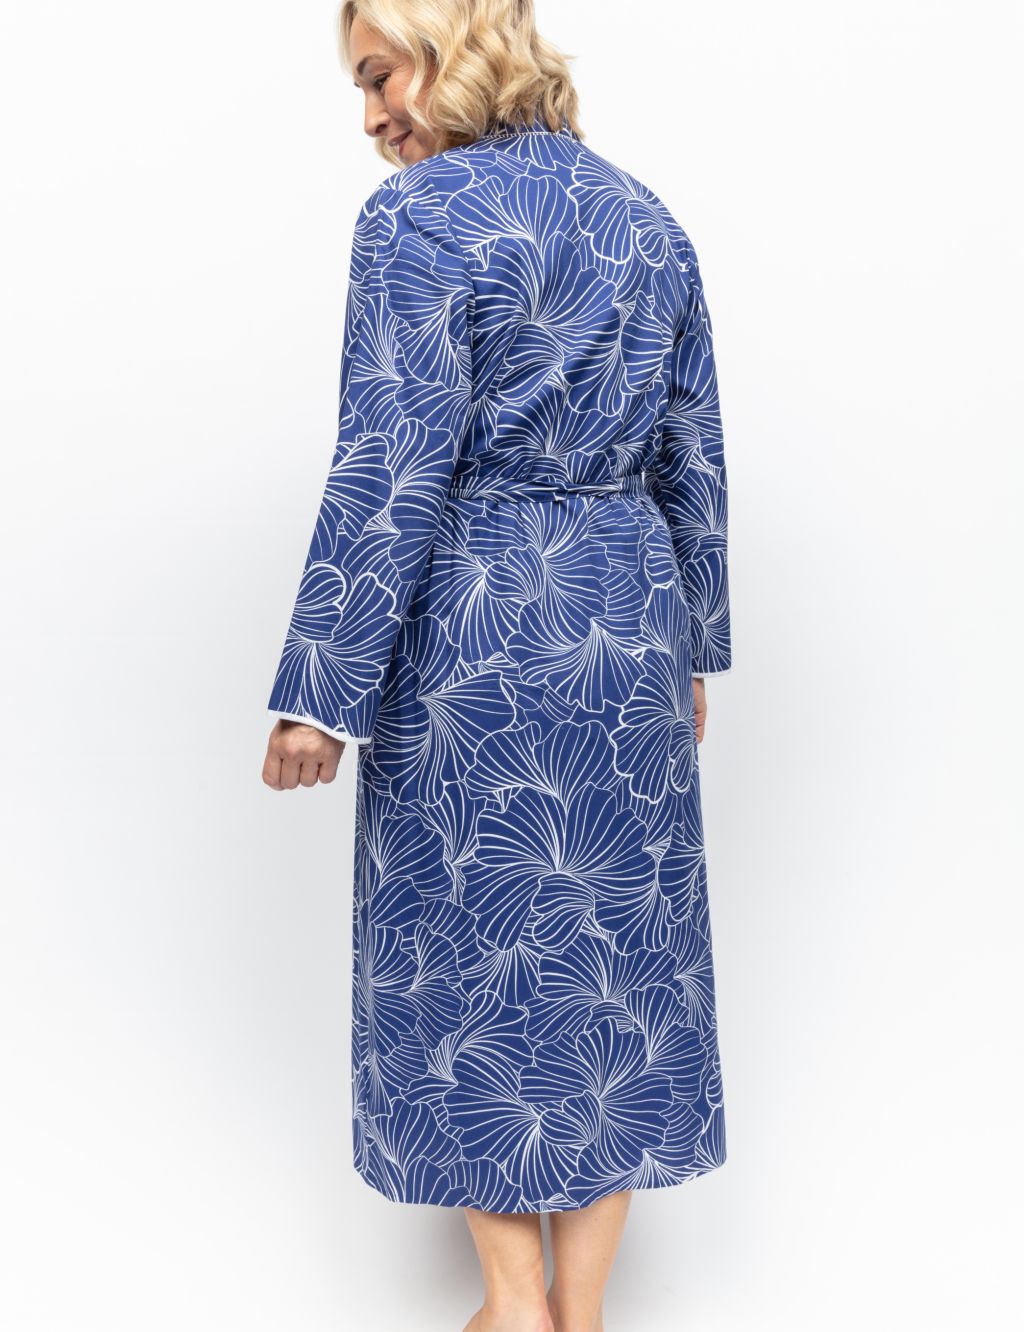 Cotton Modal Shell Print Dressing Gown image 4